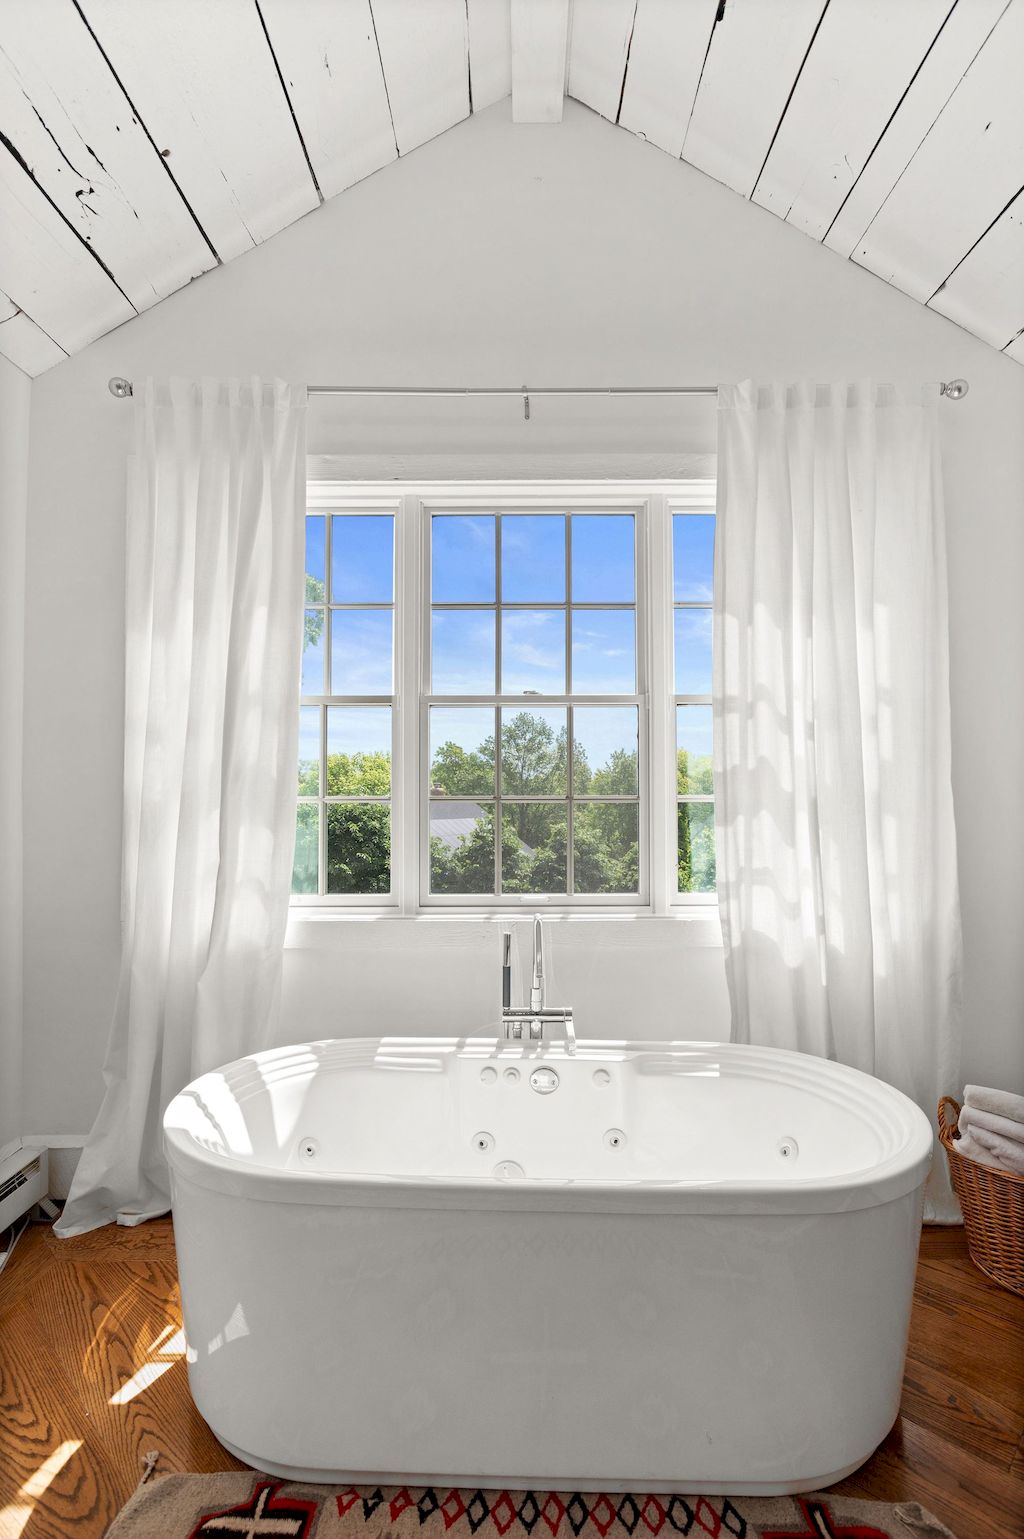 If you have a small bathroom with a window, hanging curtains can add privacy and style. However, curtains can also take up valuable space and make the room feel smaller. To avoid this, consider hanging curtains strategically. Use a tension rod or install the rod closer to the ceiling to create the illusion of higher ceilings. Additionally, use curtains that match the color of your walls to create a cohesive look that doesn't overpower the room. By hanging curtains strategically, you can add privacy and style to your small bathroom without sacrificing space.